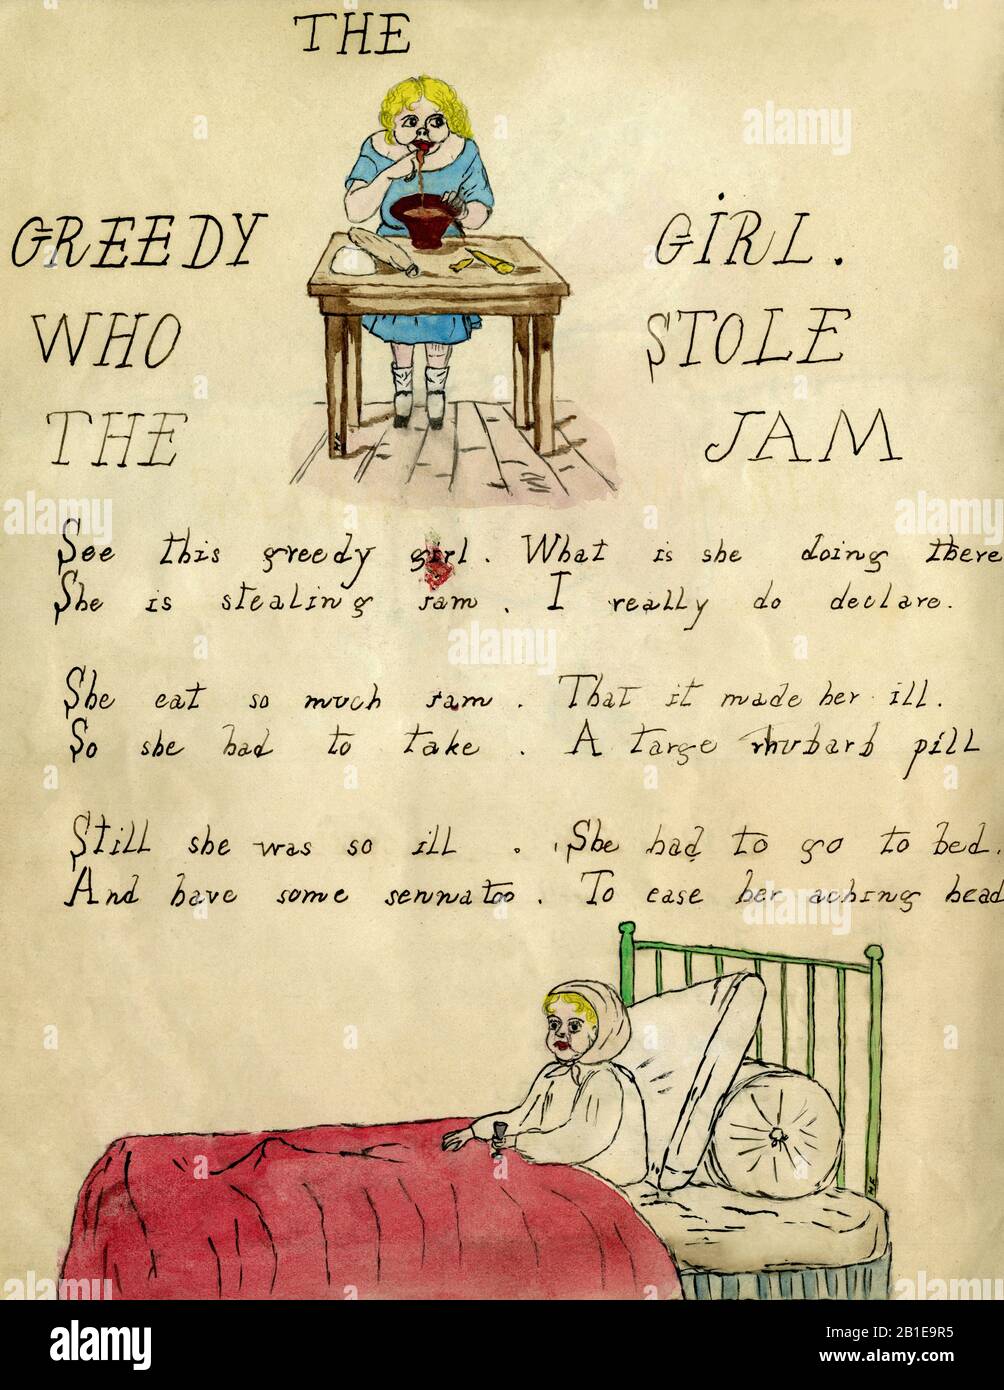 Greedy Girl cautionary tale in painting and verse, created in England in the late 1800s by a Victorian child.  Part of a manuscript volume compiled circa 1880 for May Chatteris Fisher (1874-1910) by her cousins.  The verse on this page explains that the Greedy Girl made herself ill by eating “so much jam”, then had to go to bed and take a 'large rhubarb pill' and 'some Senna too to ease her aching head'. Stock Photo